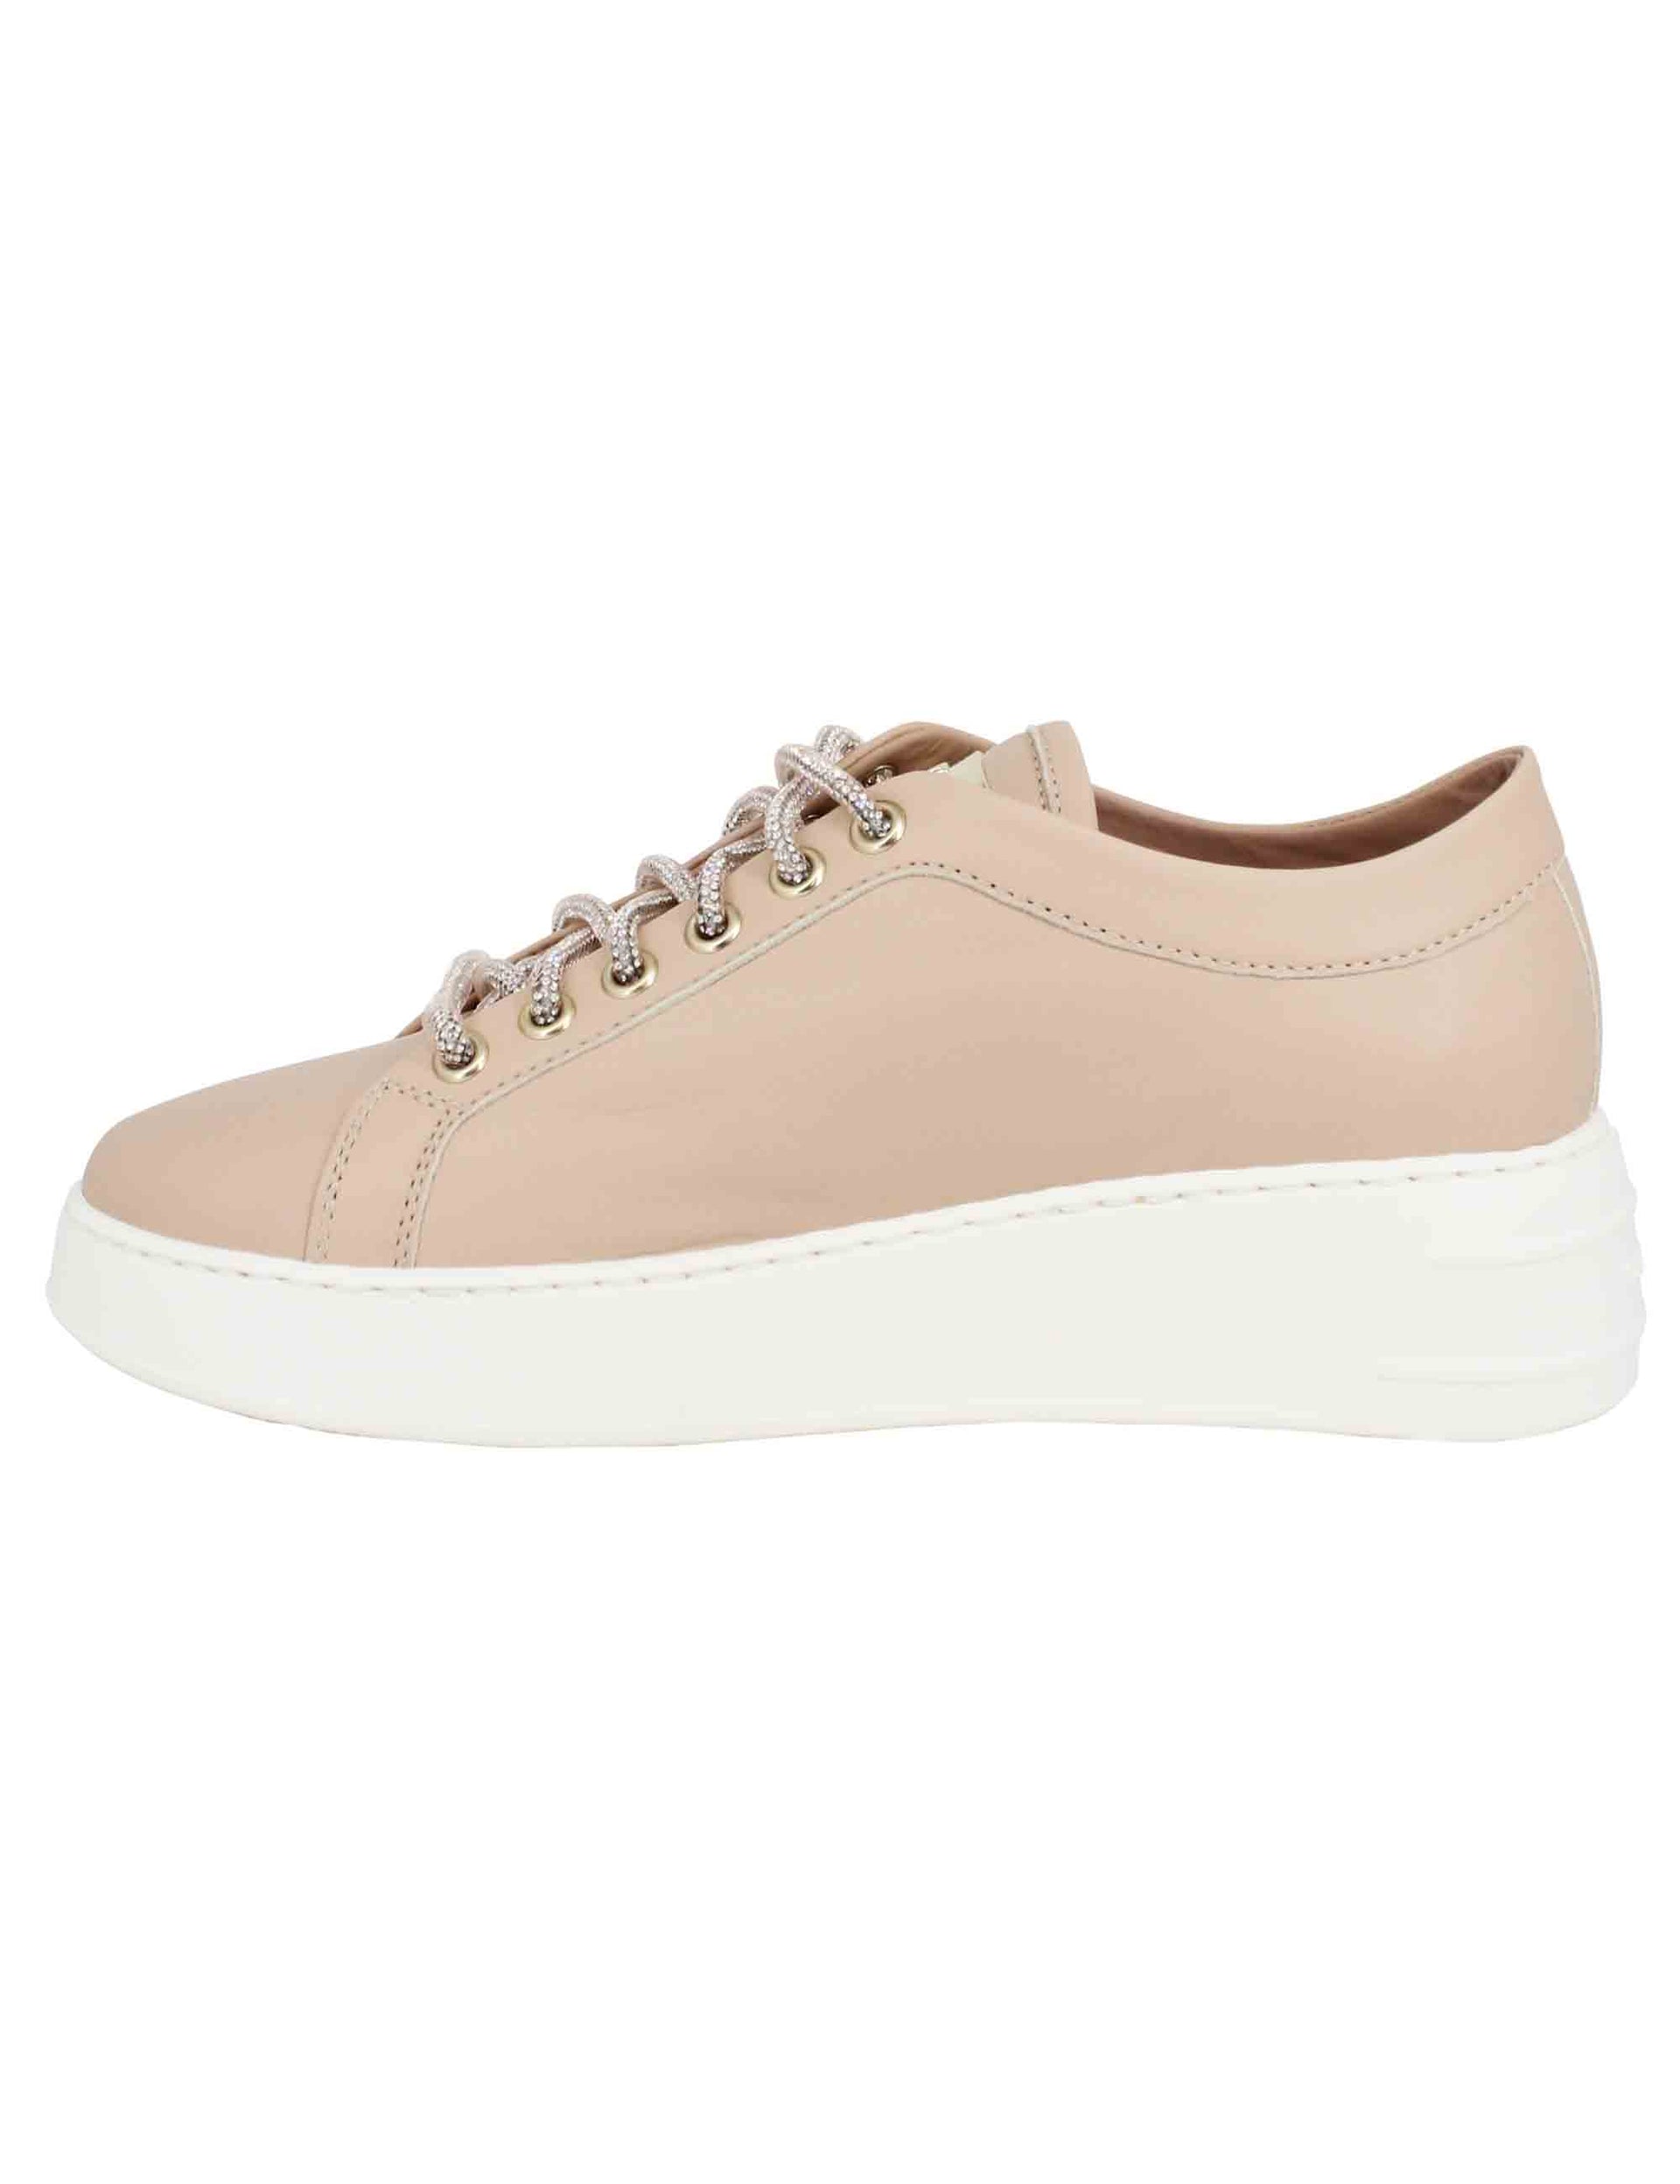 Women's nude leather sneakers with rhinestone laces